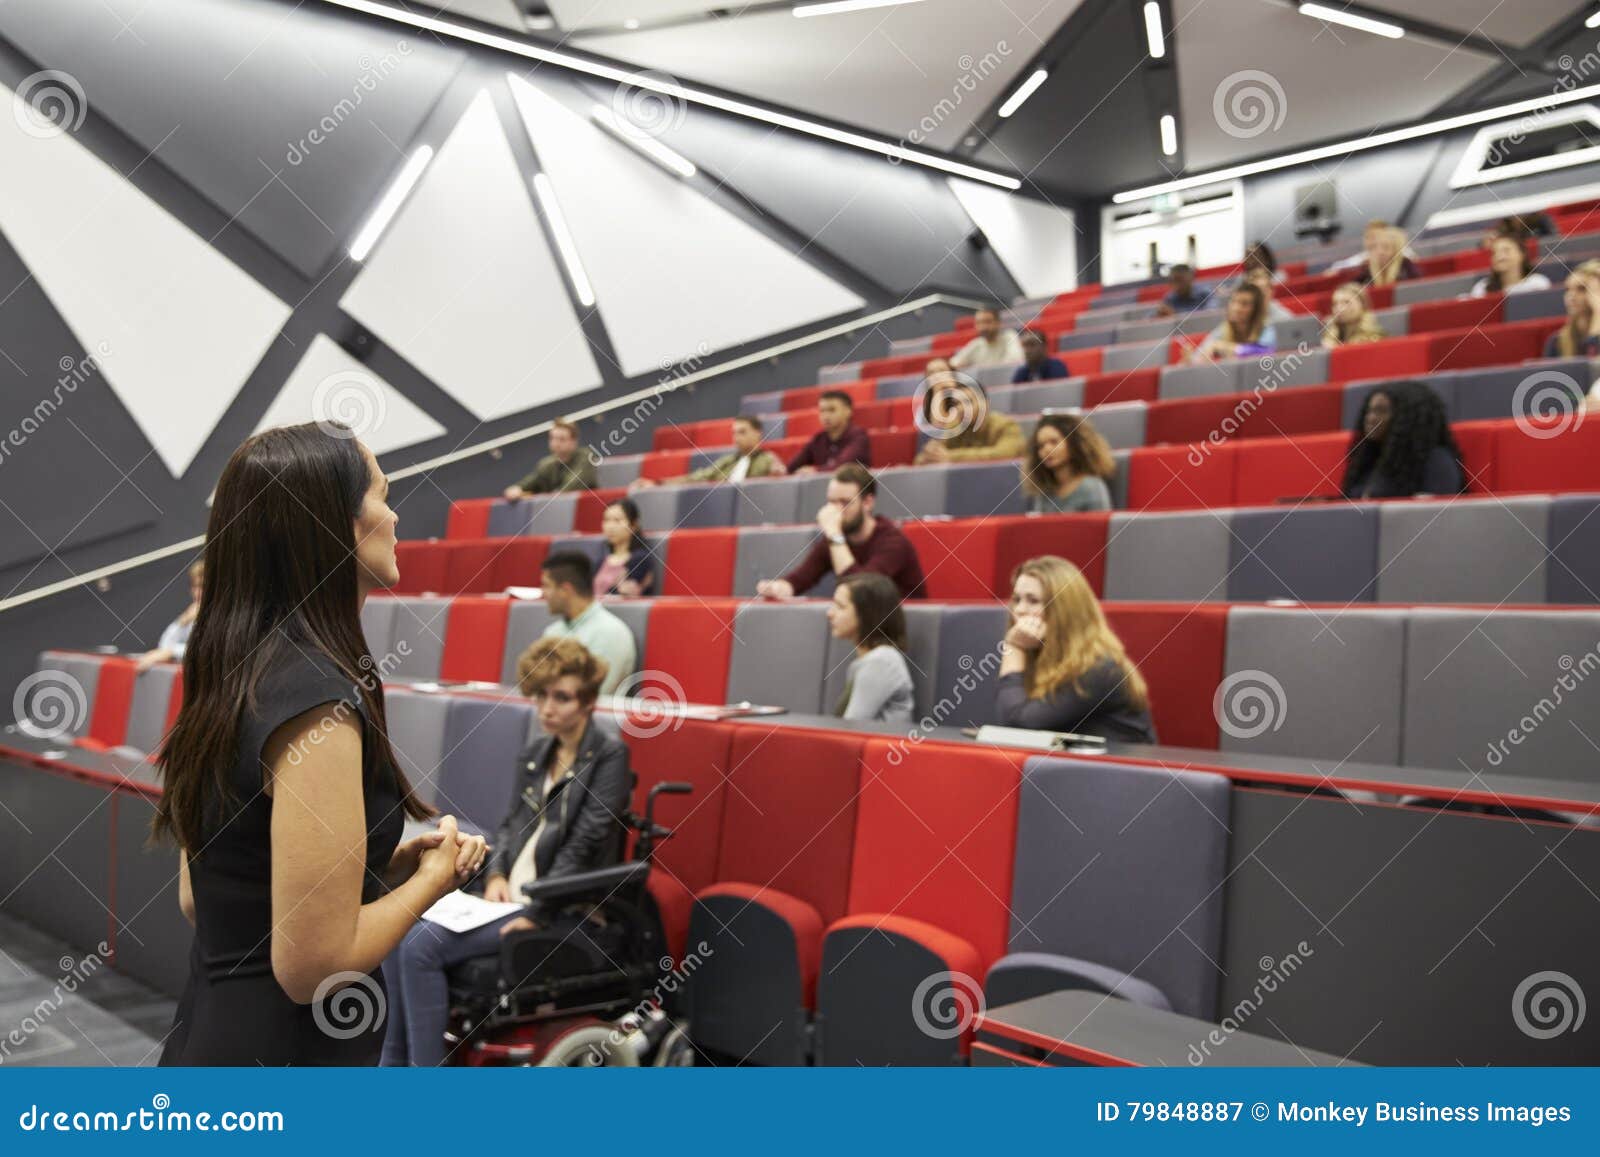 woman lecturing students in a university lecture theatre